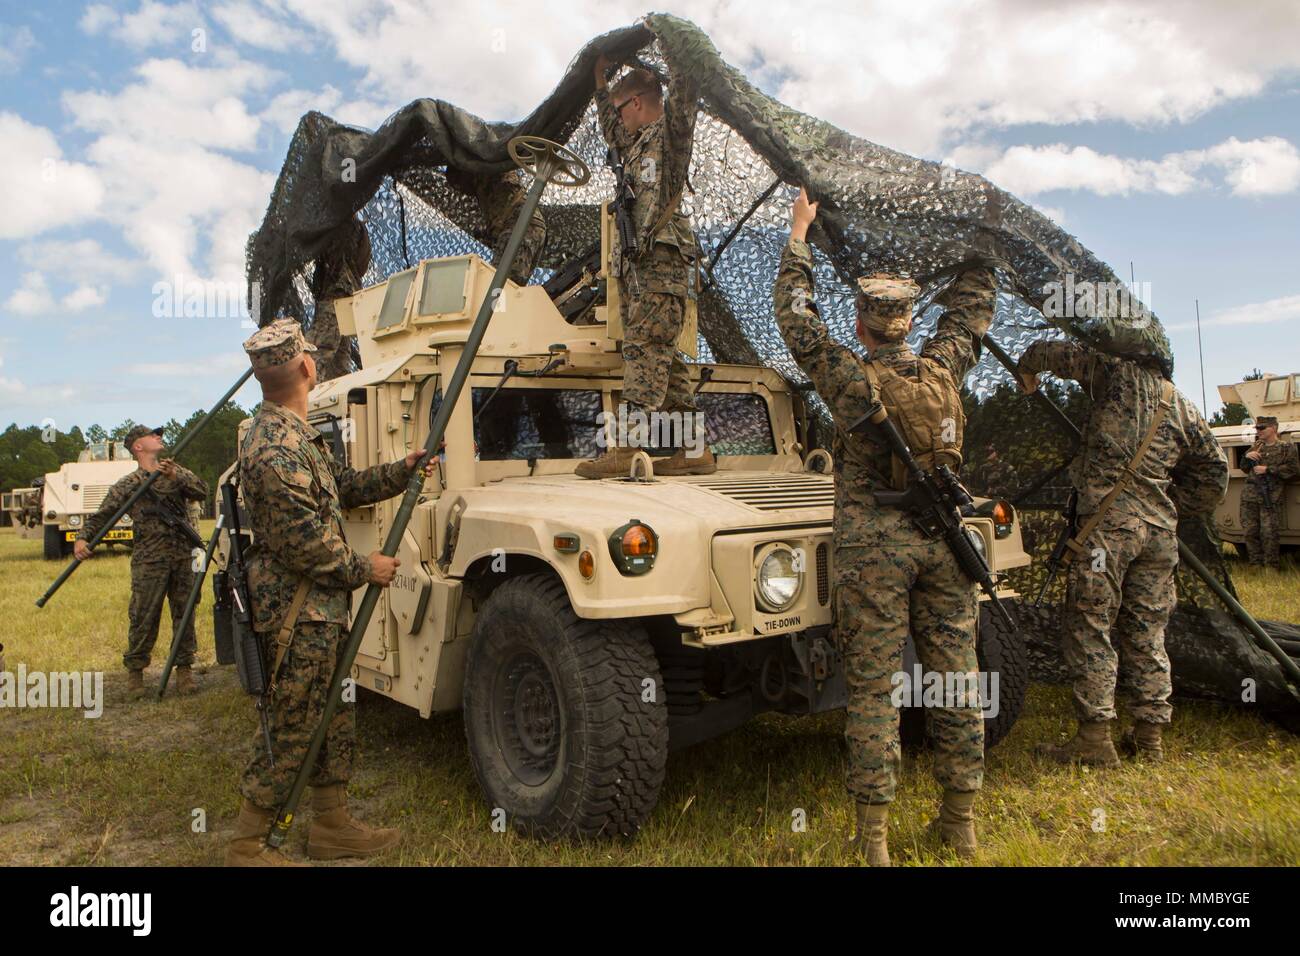 https://c8.alamy.com/comp/MMBYGE/marines-with-2nd-transportation-support-battalion-2nd-marine-logistics-group-learn-how-to-properly-set-up-camouflage-netting-around-a-high-mobility-multipurpose-wheeled-vehicle-during-a-convoy-operation-at-camp-lejeune-nc-oct-5-2017-2nd-tsb-was-charged-with-ensuring-transportation-capabilities-of-personnel-equipment-and-supplies-in-support-of-the-ii-marine-expeditionary-force-us-marine-corps-photo-by-lance-cpl-abrey-d-liggins-MMBYGE.jpg